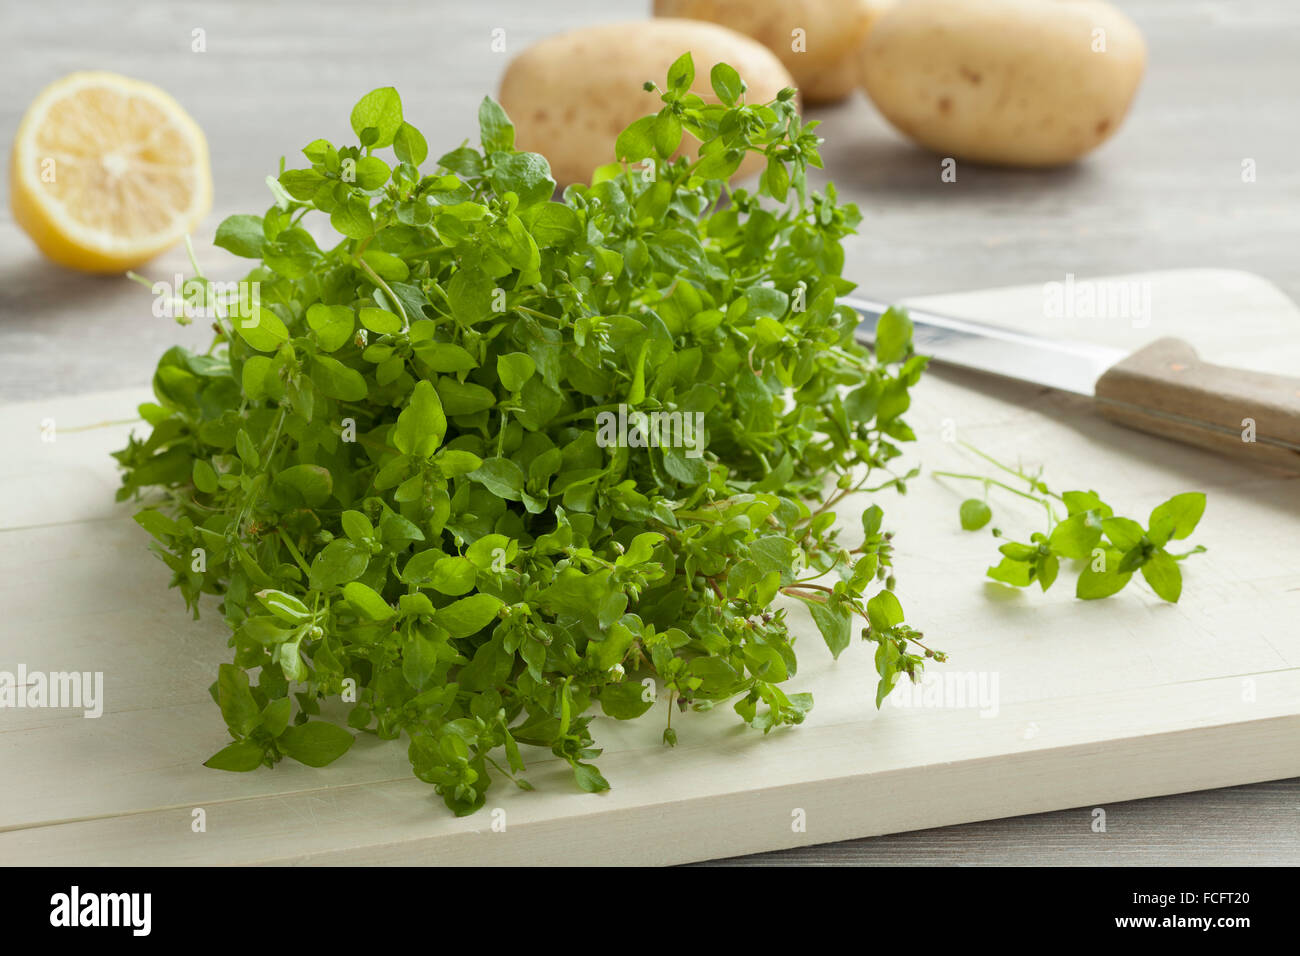 Heap of fresh green chickweed on a cutting board Stock Photo